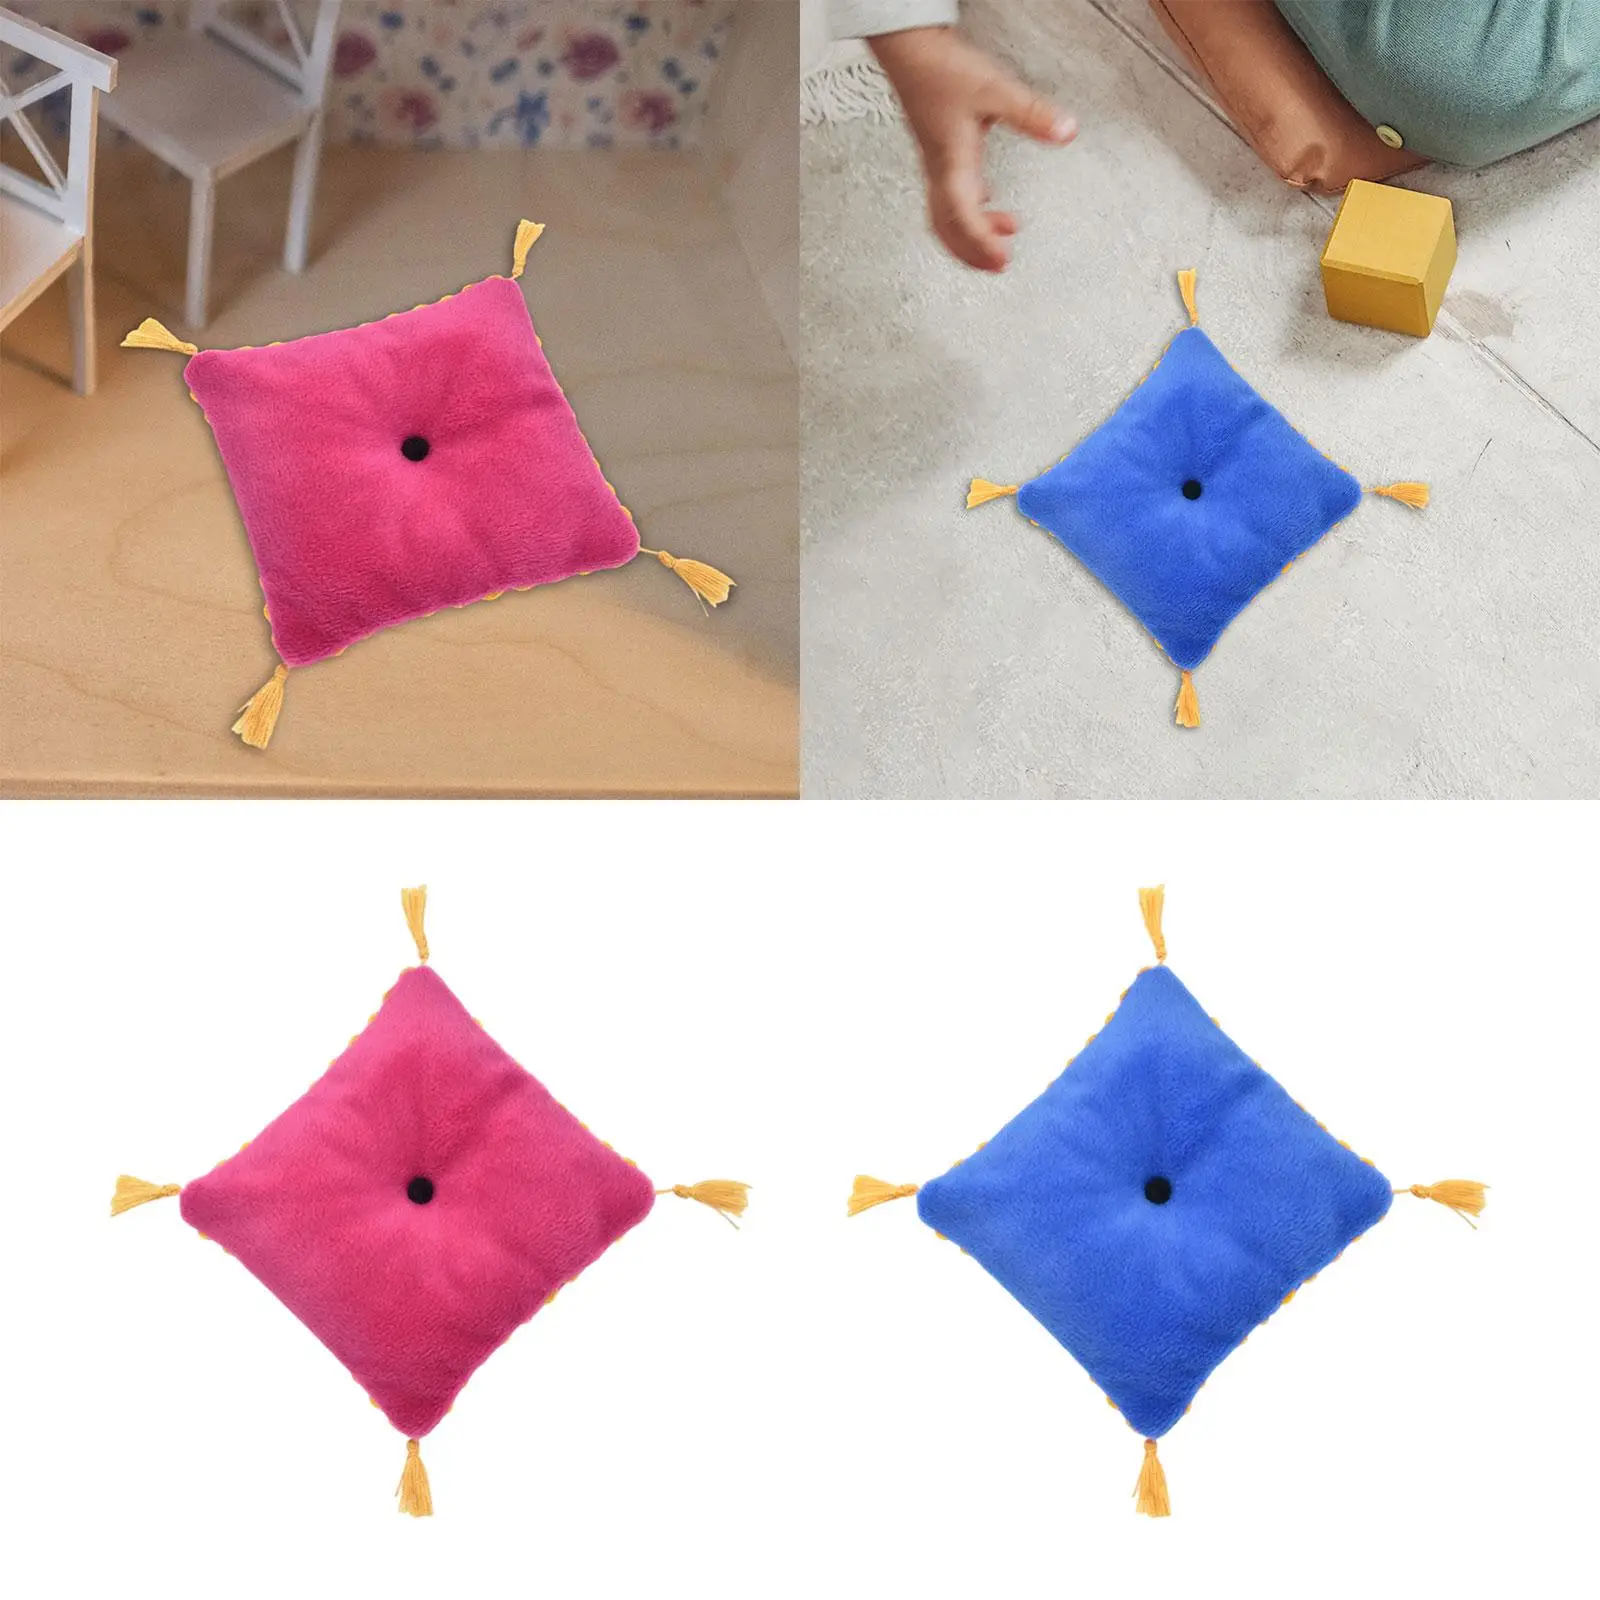 1:6 Scale Dollhouse Pillow Pretend Play Accessories Decor Micro Landscape Ornament for Boys Children Kids Girls Holiday Gifts